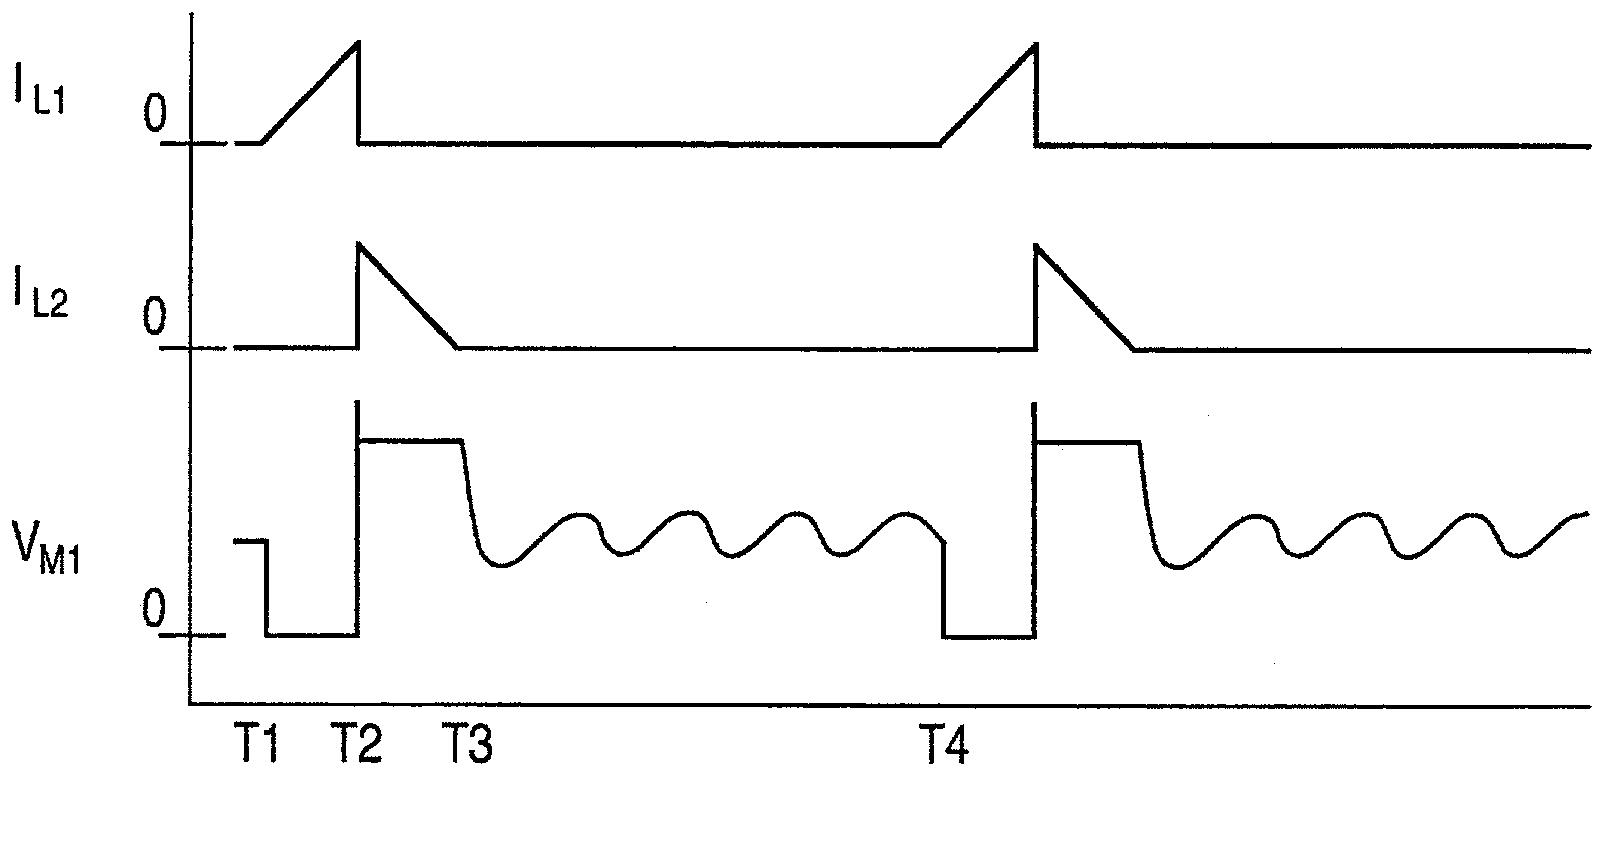 Flyback converter with primary side voltage sensing and overvoltage protection during low load operation